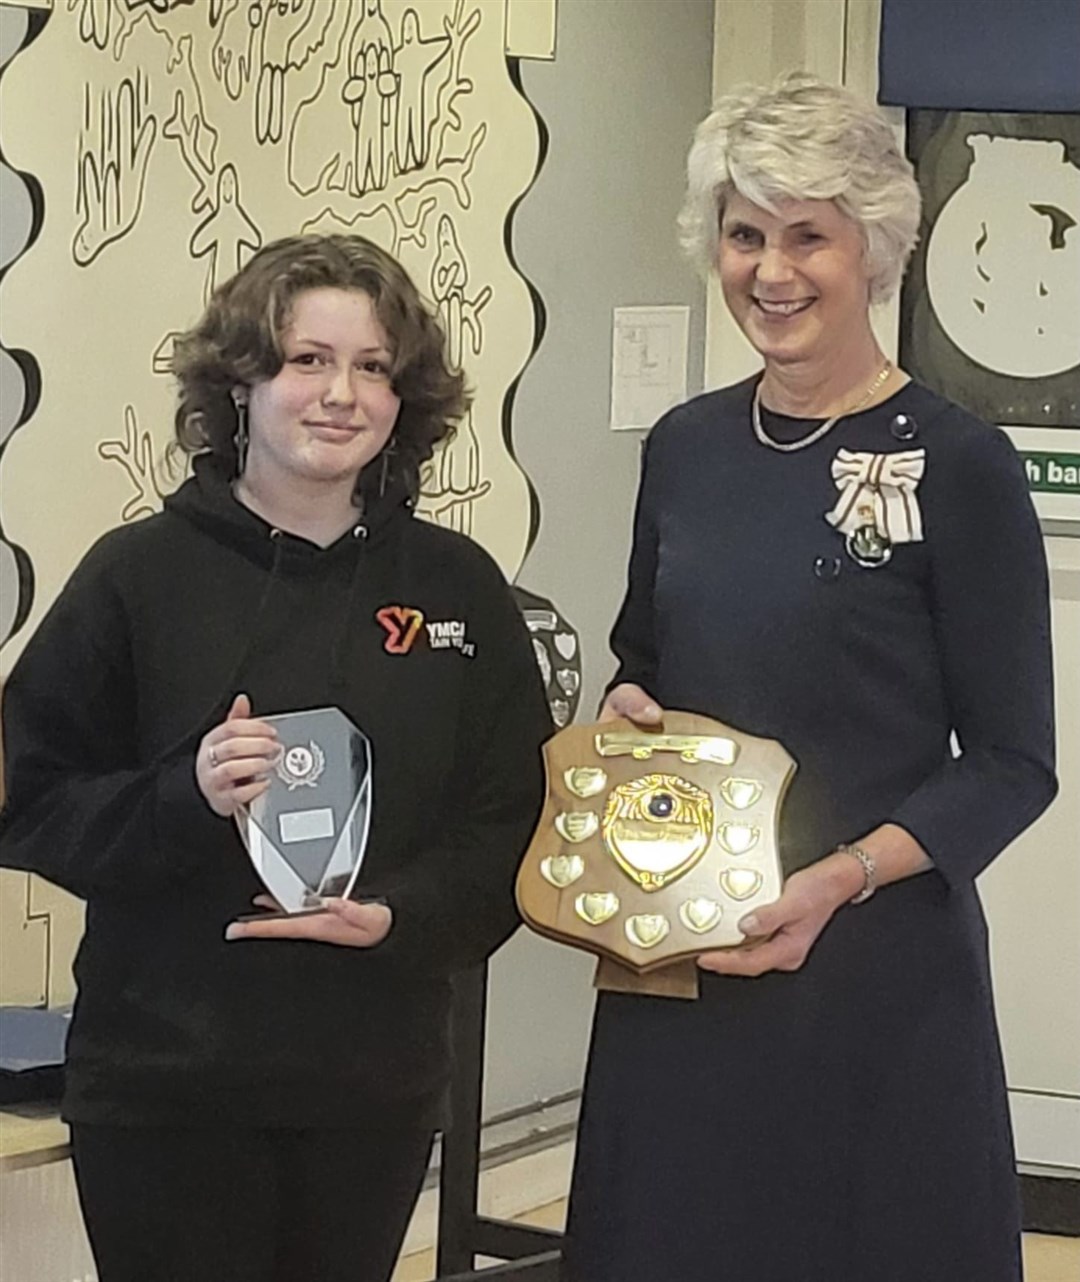 Danielle Ritchie, recipient of the Ozan Kaymak Memorial Award, pictured with Joanie Whiteford, Lord Lieutenant of Ross & Cromarty.